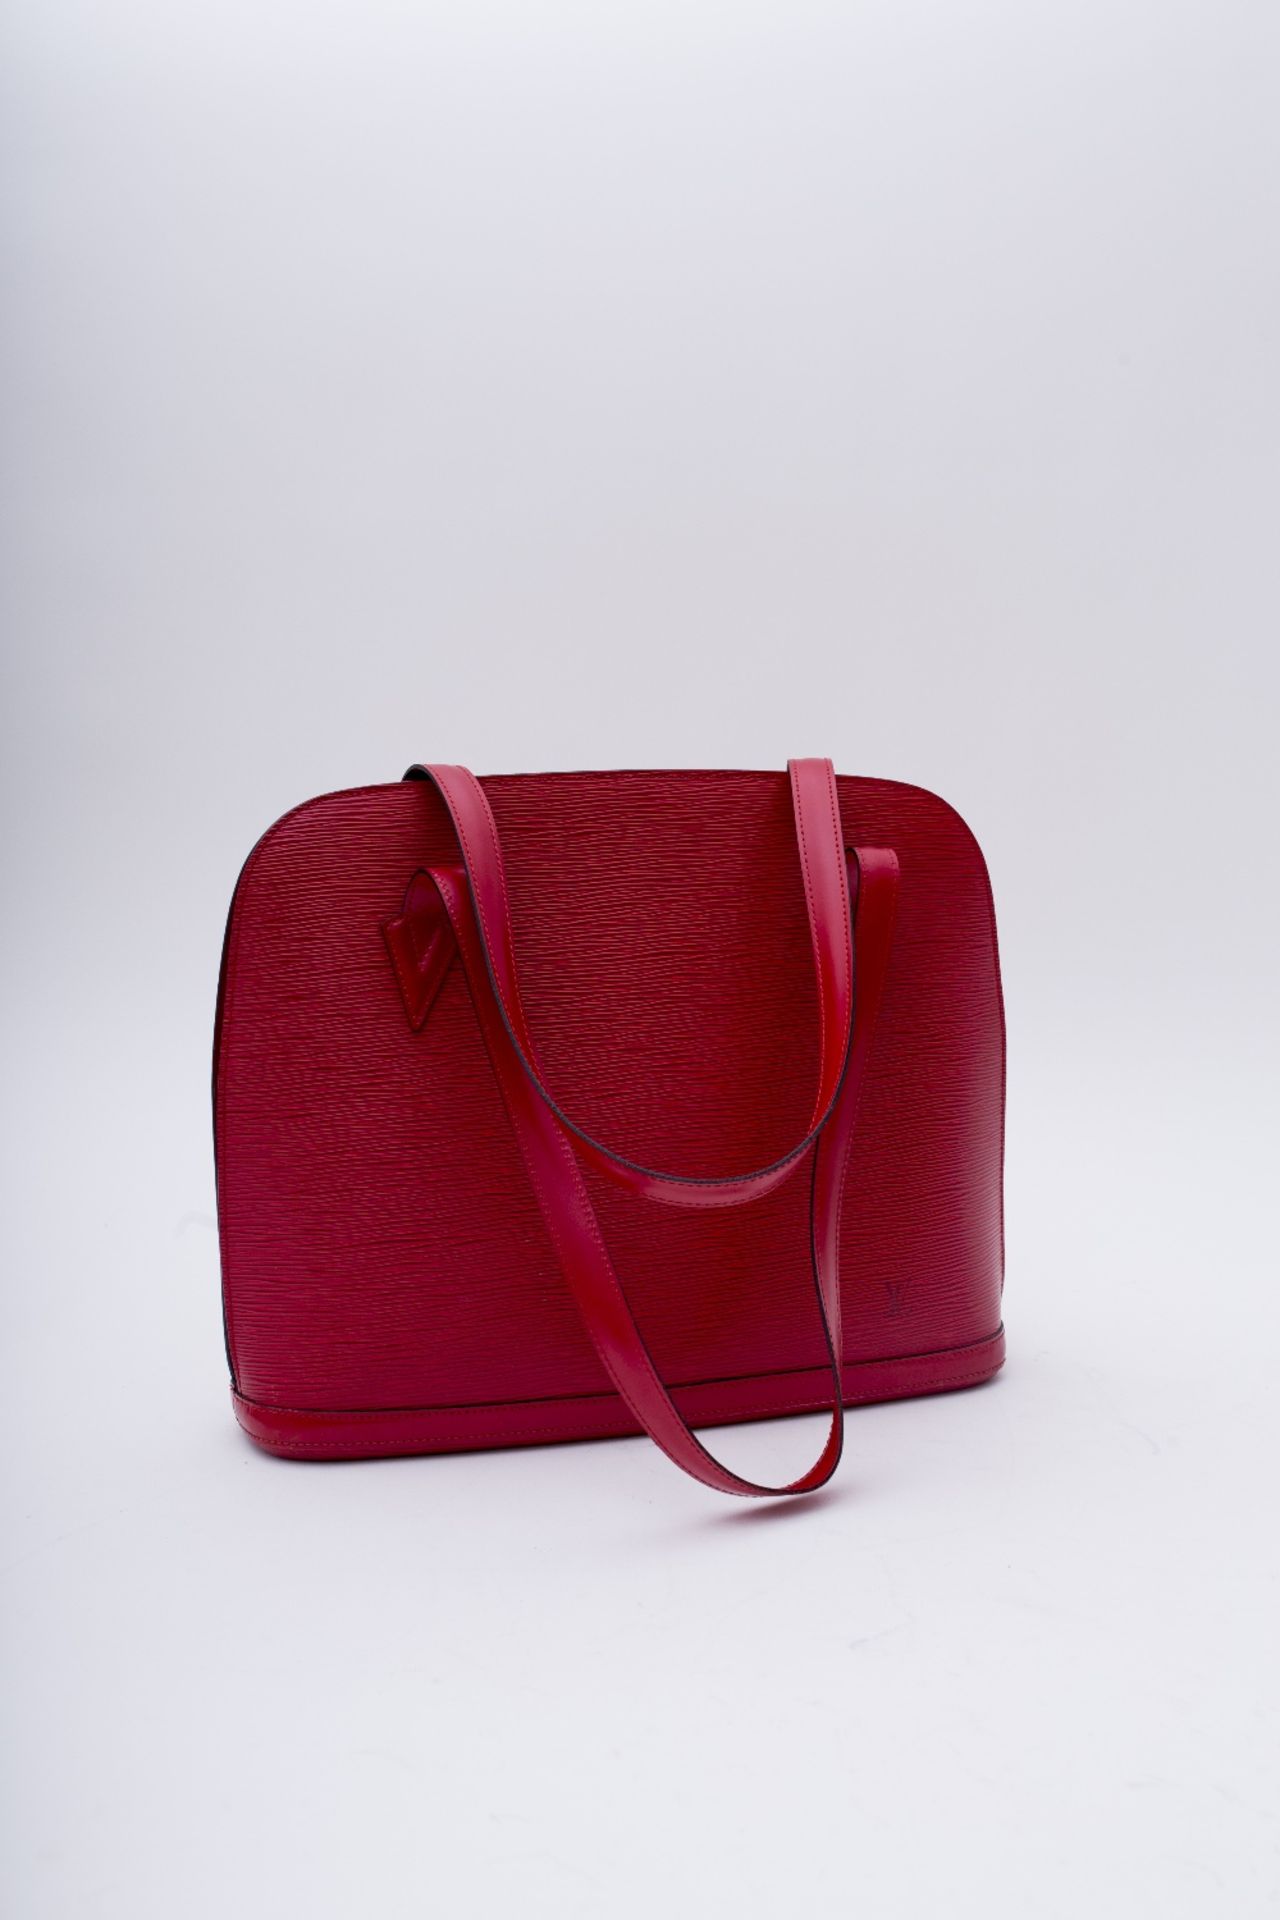 Vuitton Lussac handbag: Red epi leather. Very good condition, traces of wear. Signed "Louis - Image 2 of 4